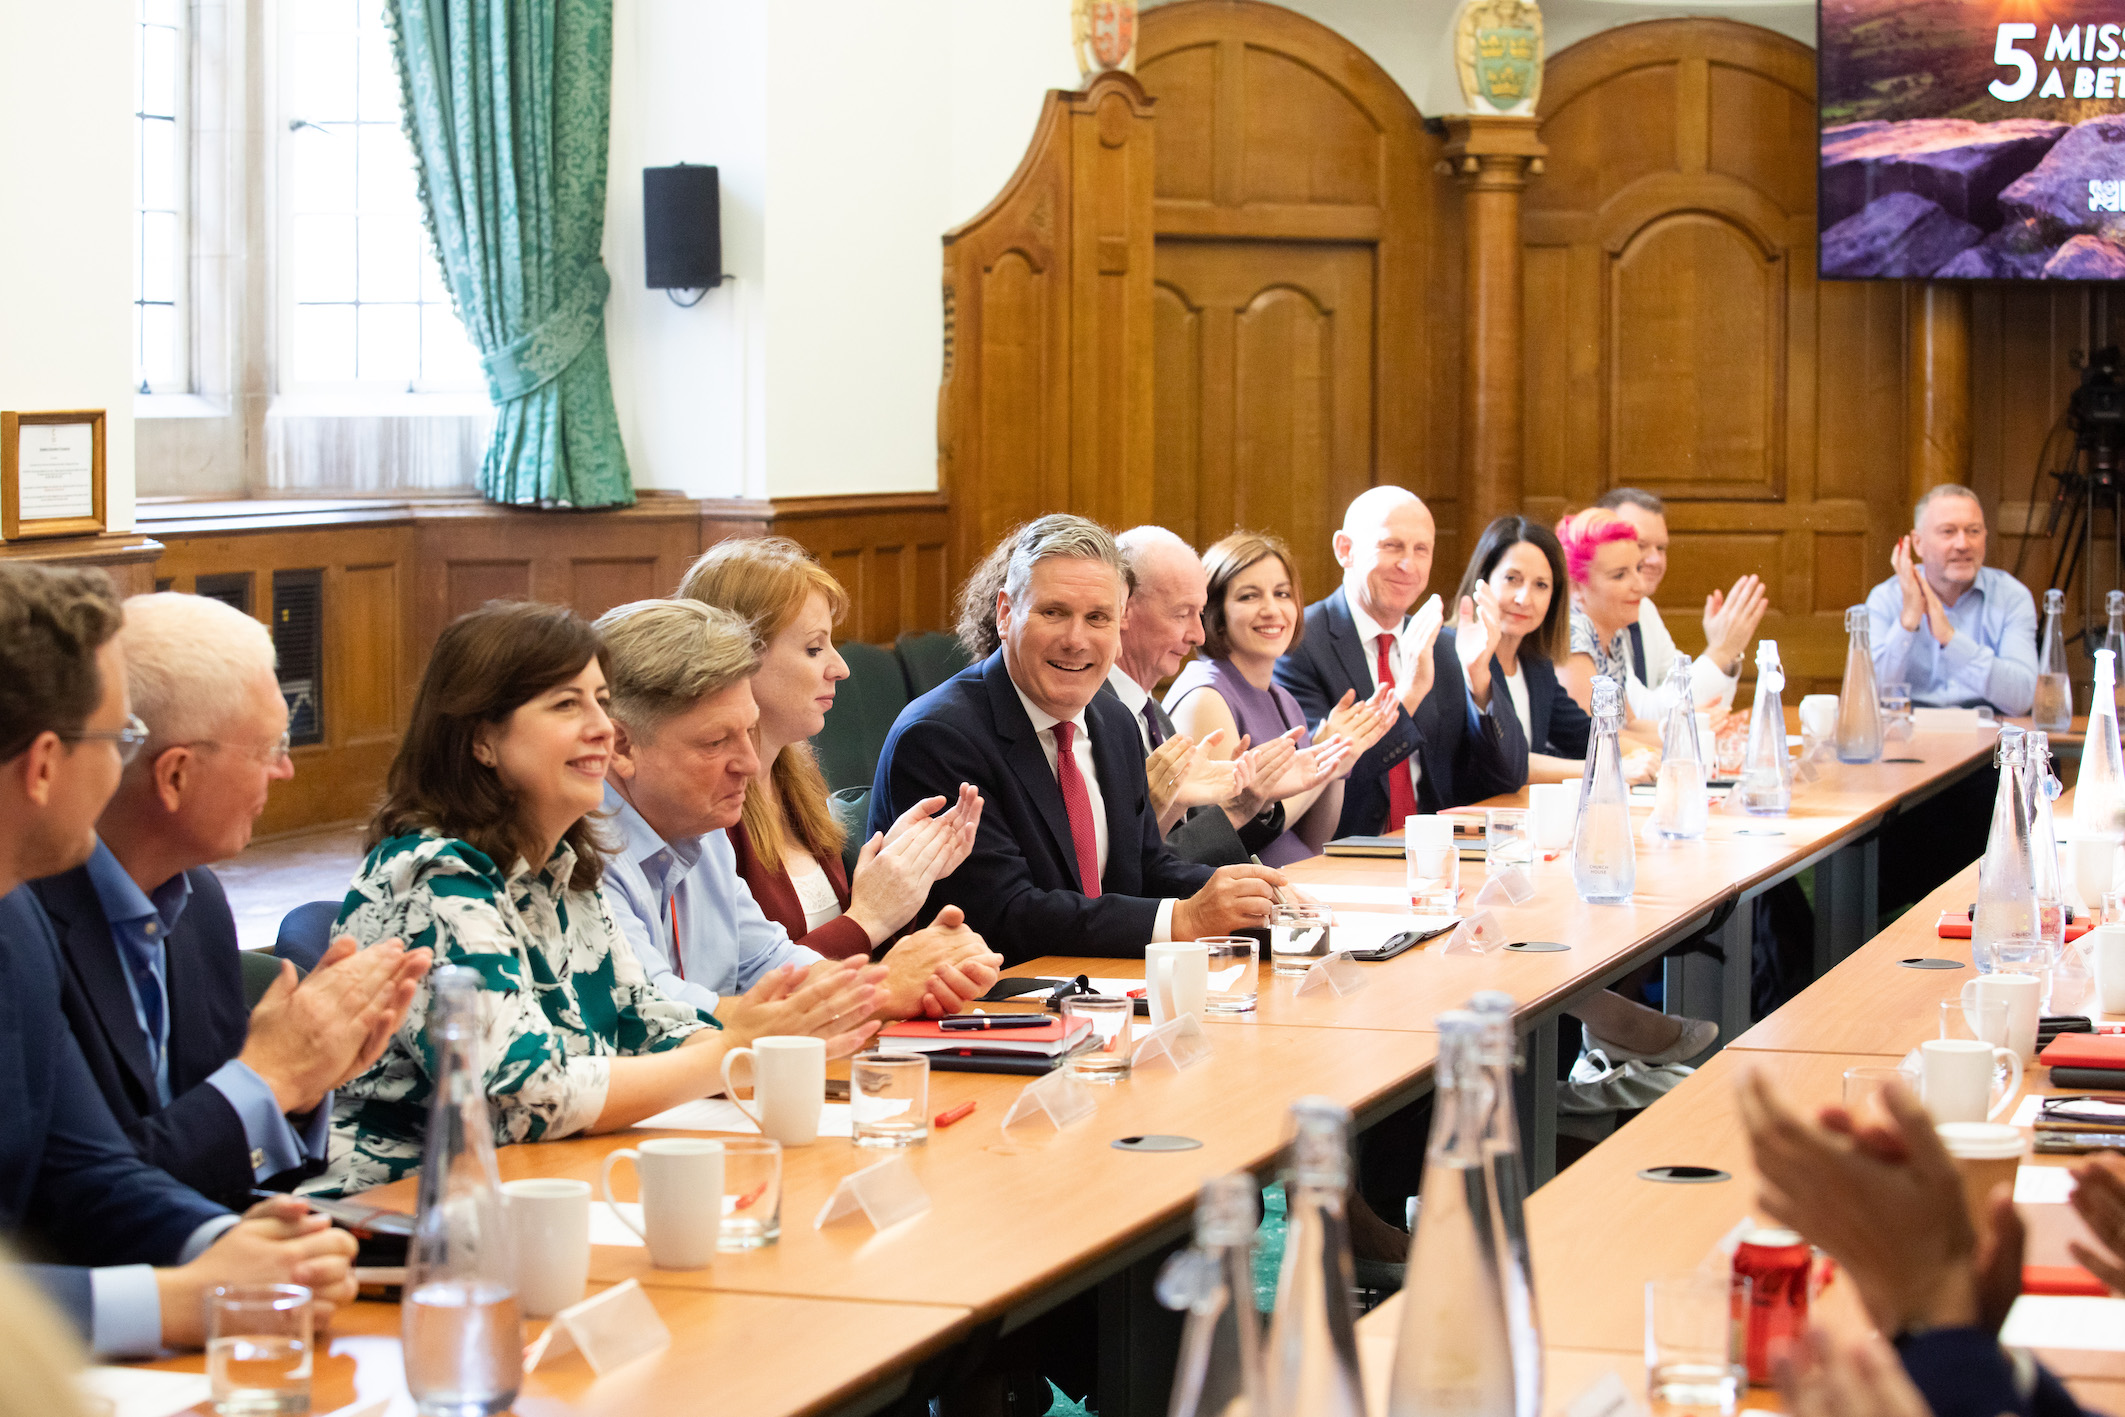 Keir Starmer addresses the shadow cabinet, with the "five missions" writ in the background. Keir Starmer's "five missions" encapsulate his political platform.